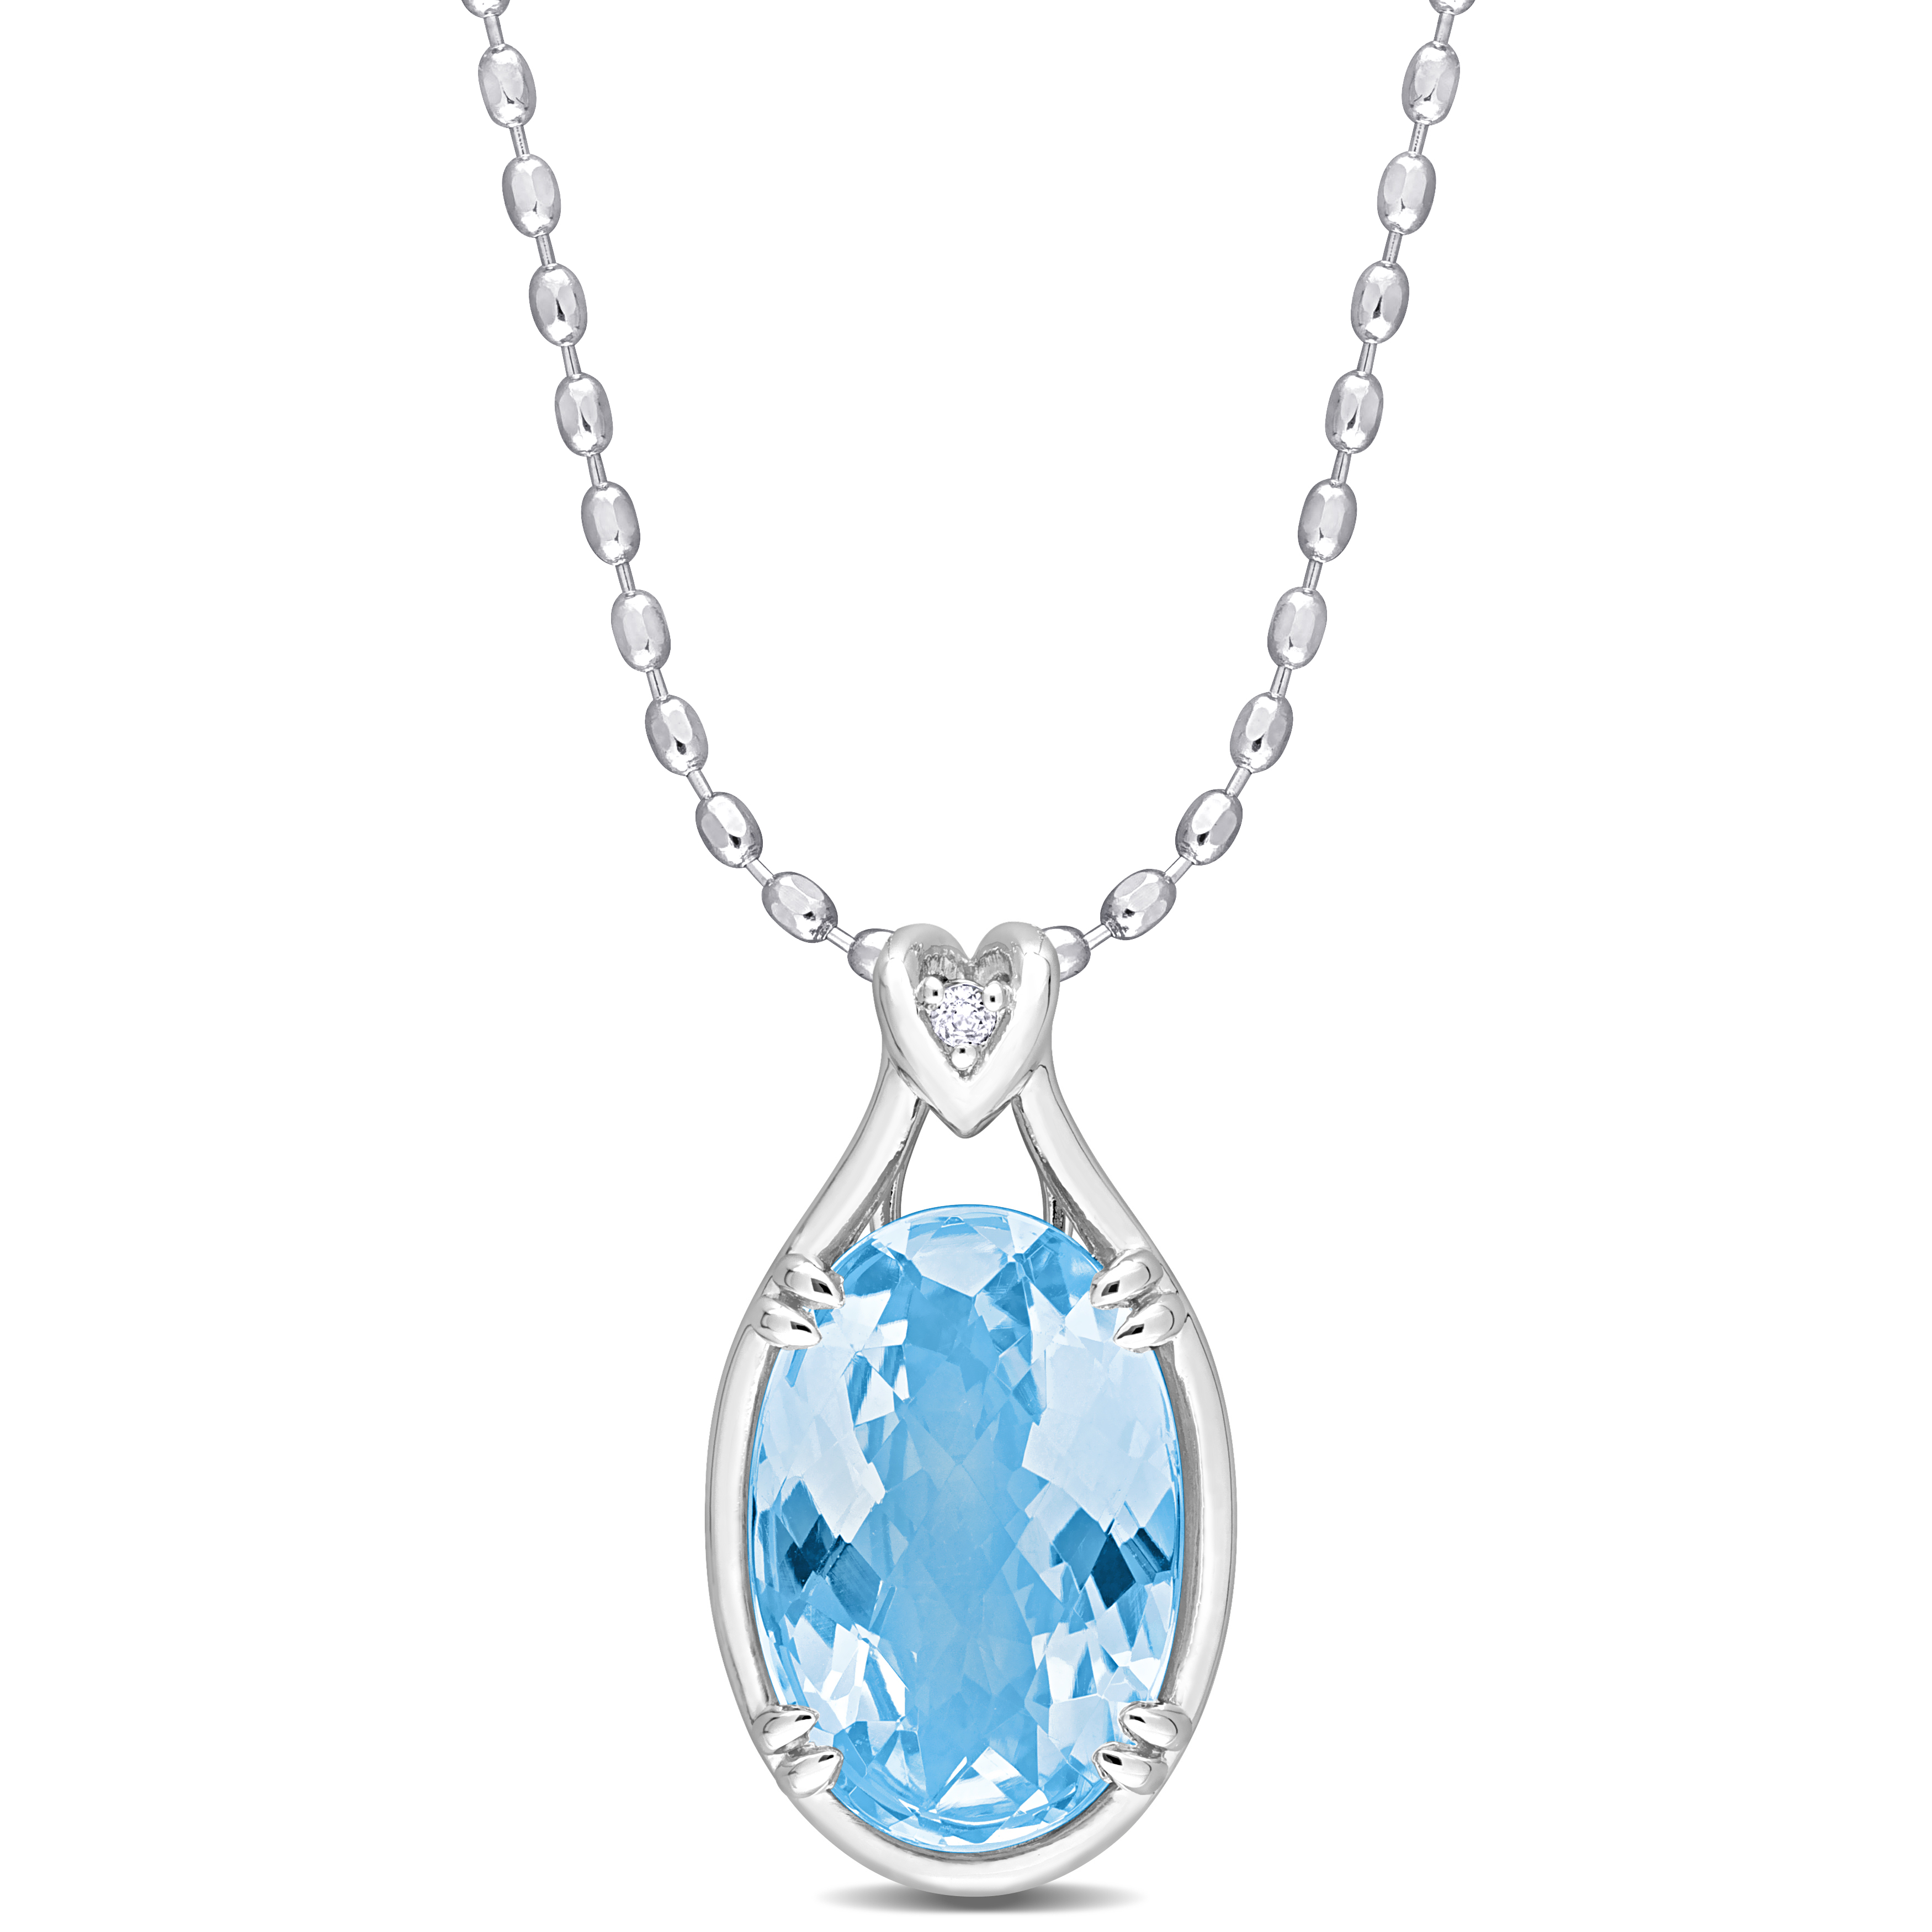 13 1/2 CT TGW Oval Checkerboard-Cut Sky Blue Topaz and White Topaz Solitaire Necklace in Sterling Silver